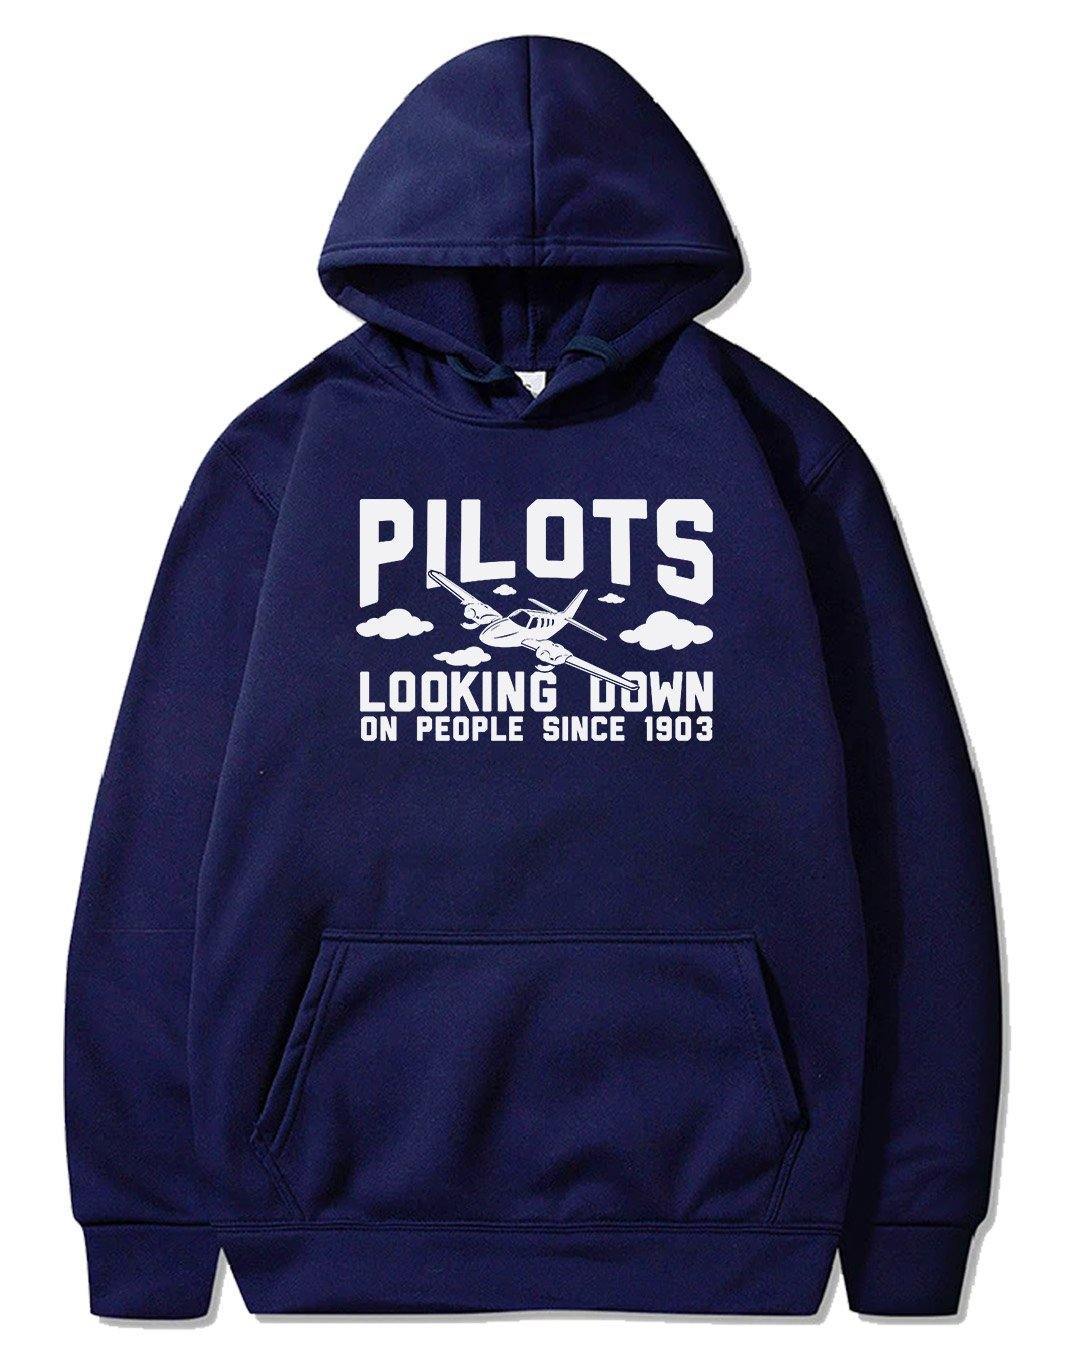 PILOTS LOOKING DOWN ON PEOPLE SINCE 1903 PULLOVER THE AV8R